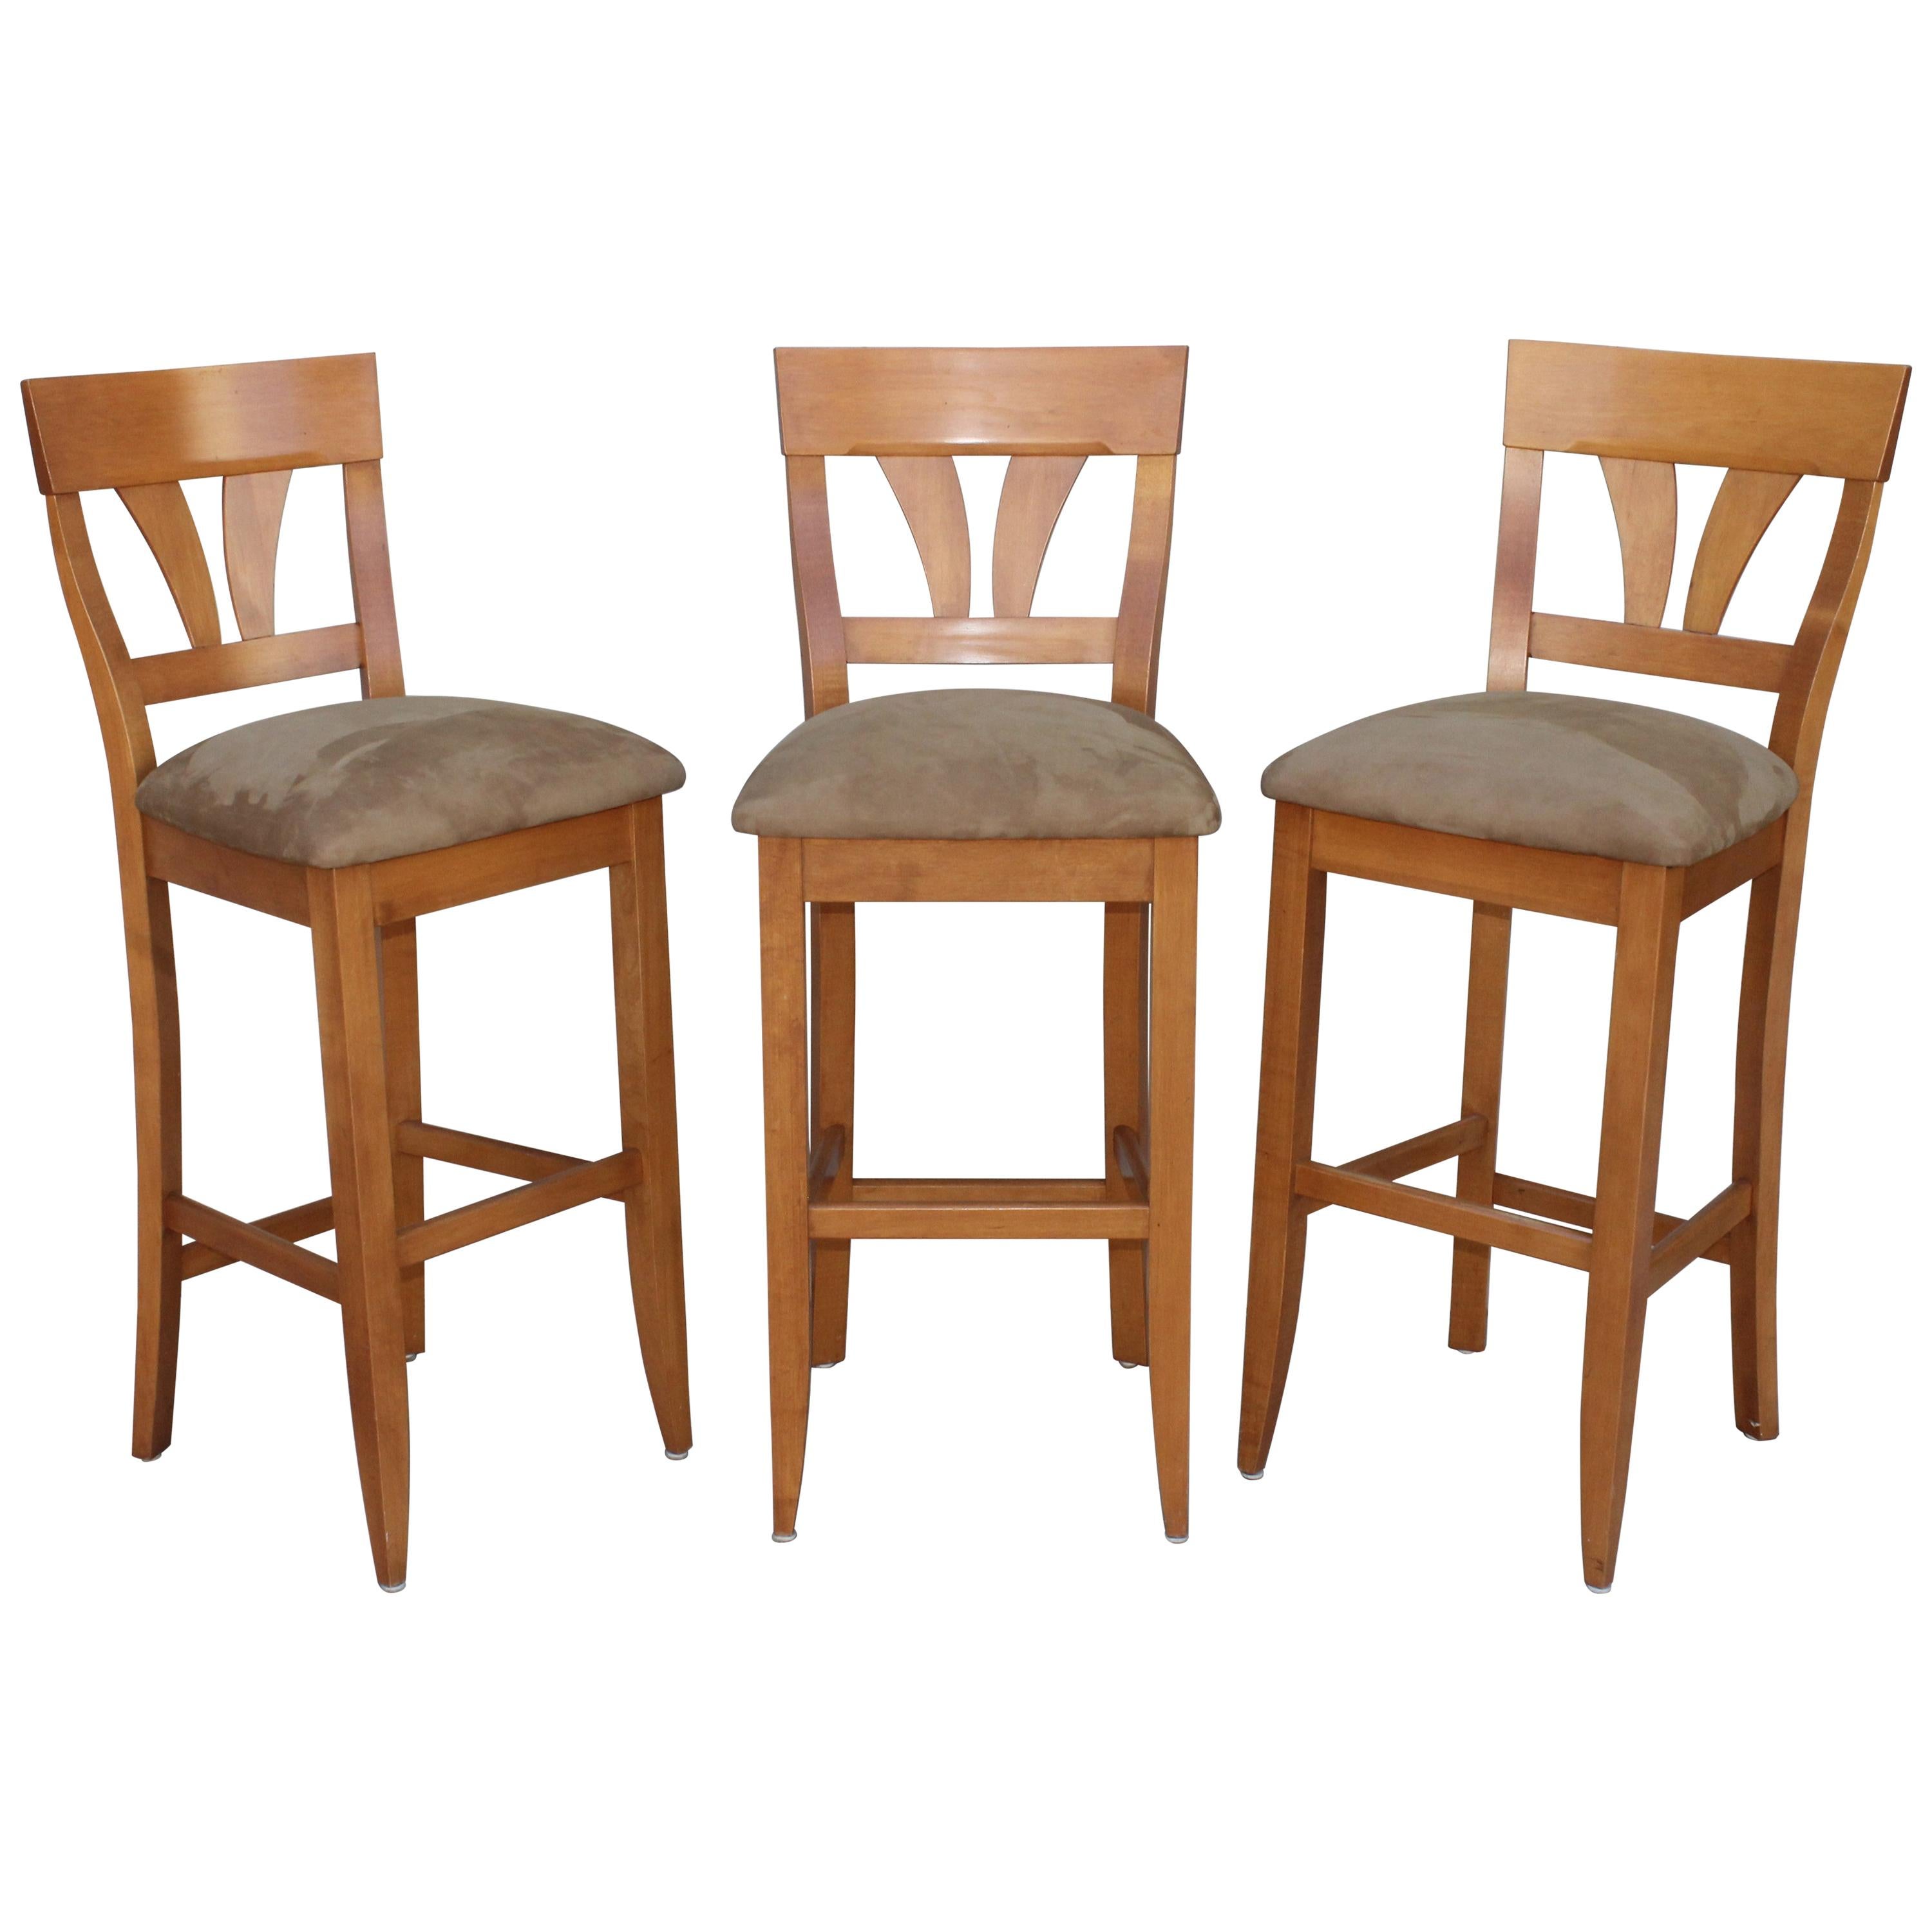 Vintage High Back Bar Stools With Suede Seats For Sale